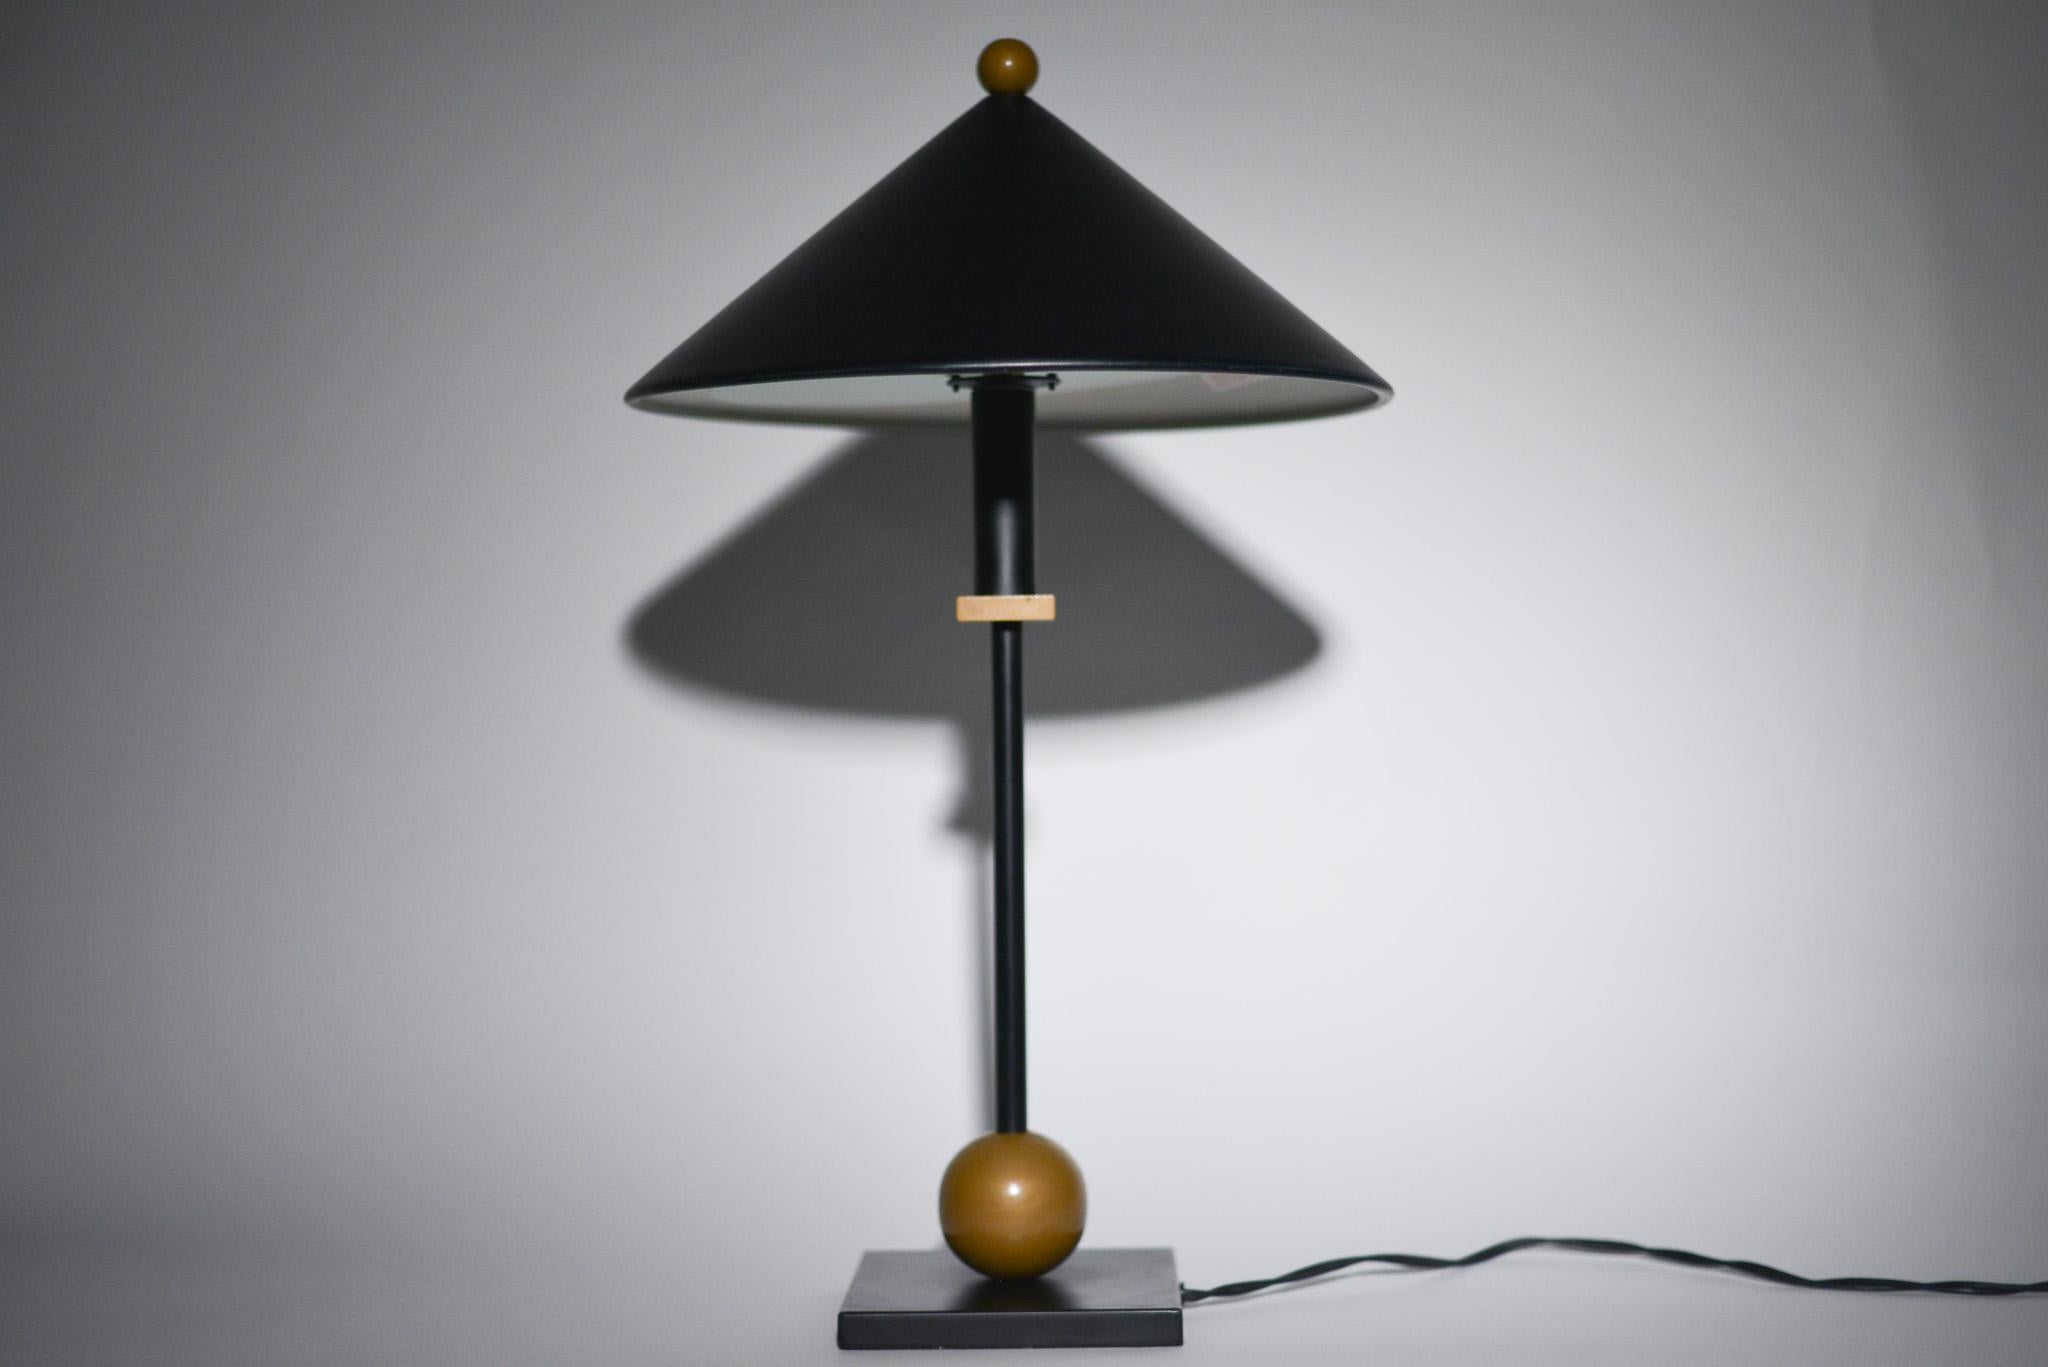 Lighting designer Robert Sonneman designed architectural and decorative lighting that captures contemporary American living. The metal cone shade and geometric brass finishes of these post modern lamps creates a functional and playful design. A